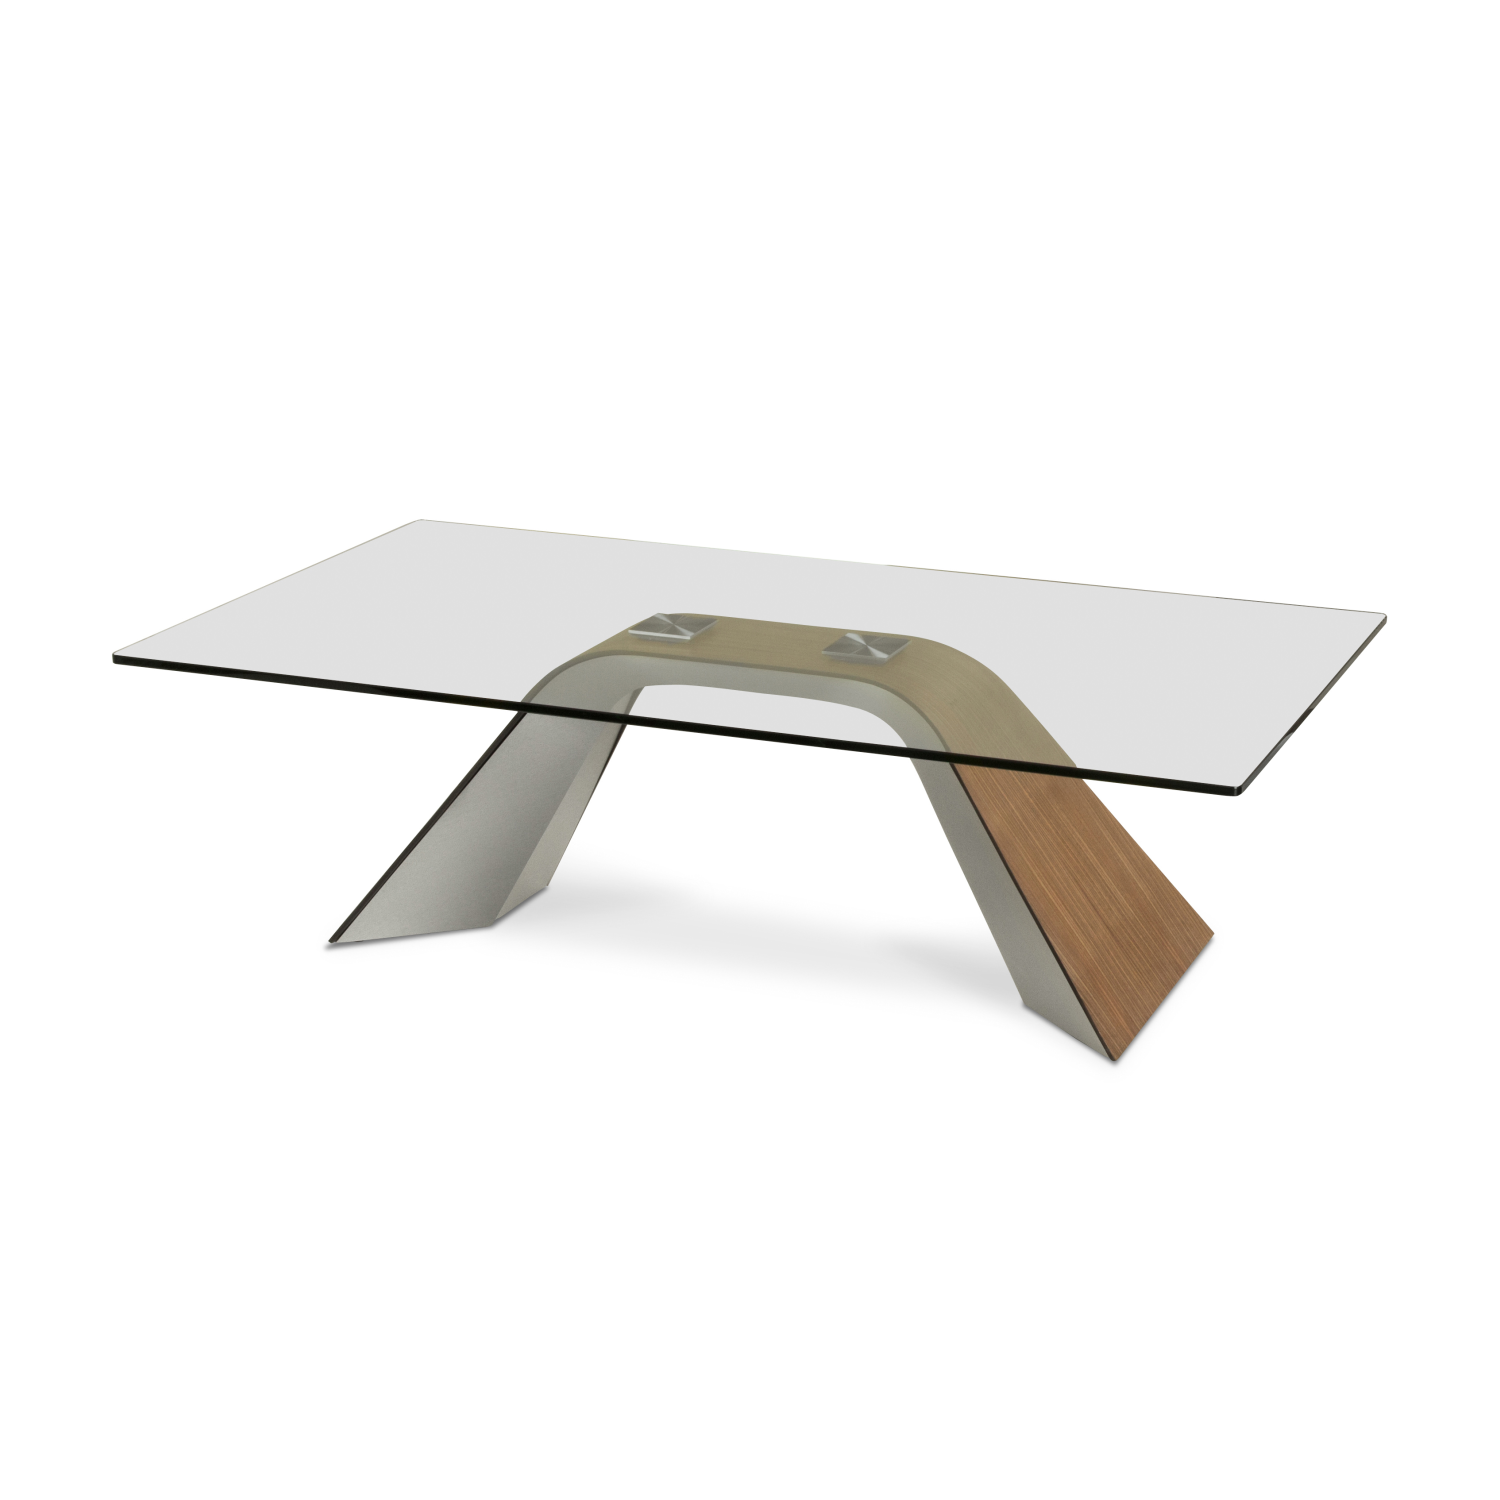 Hyper Coffee Table Image with White Background